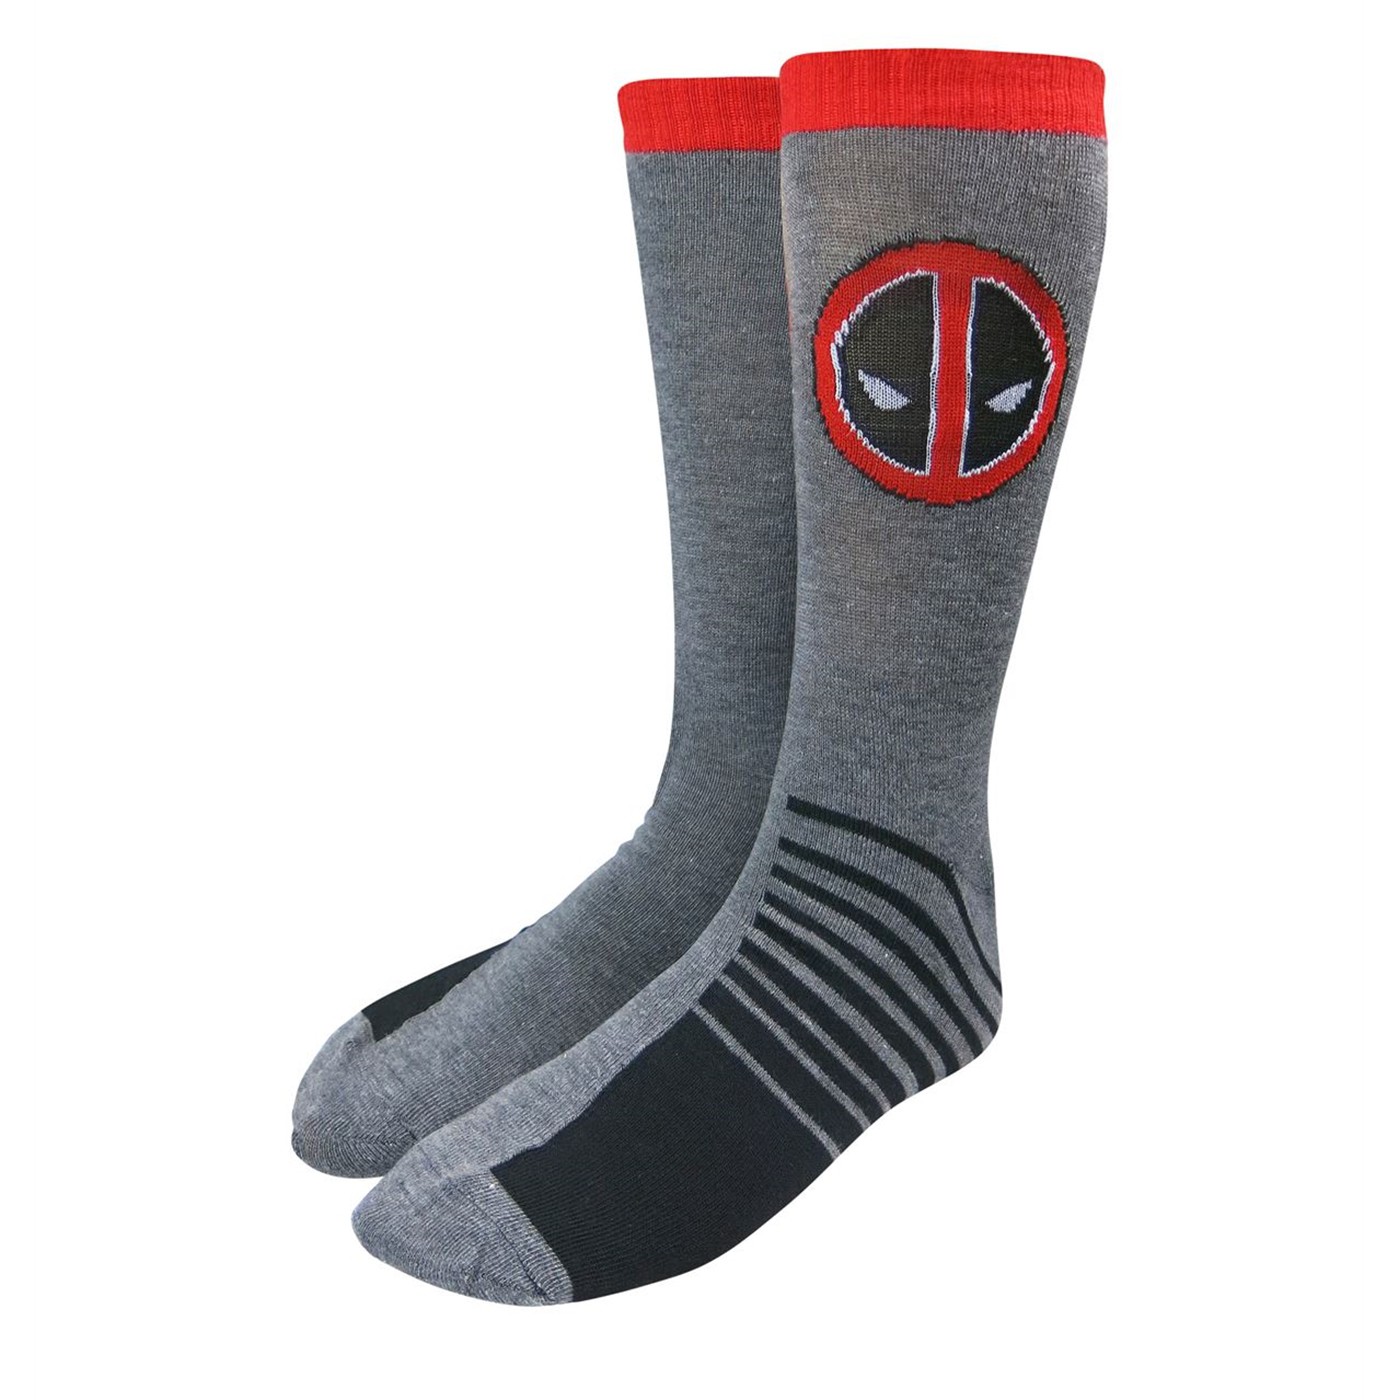 Deadpool Image and Symbol Sock 2 Pack